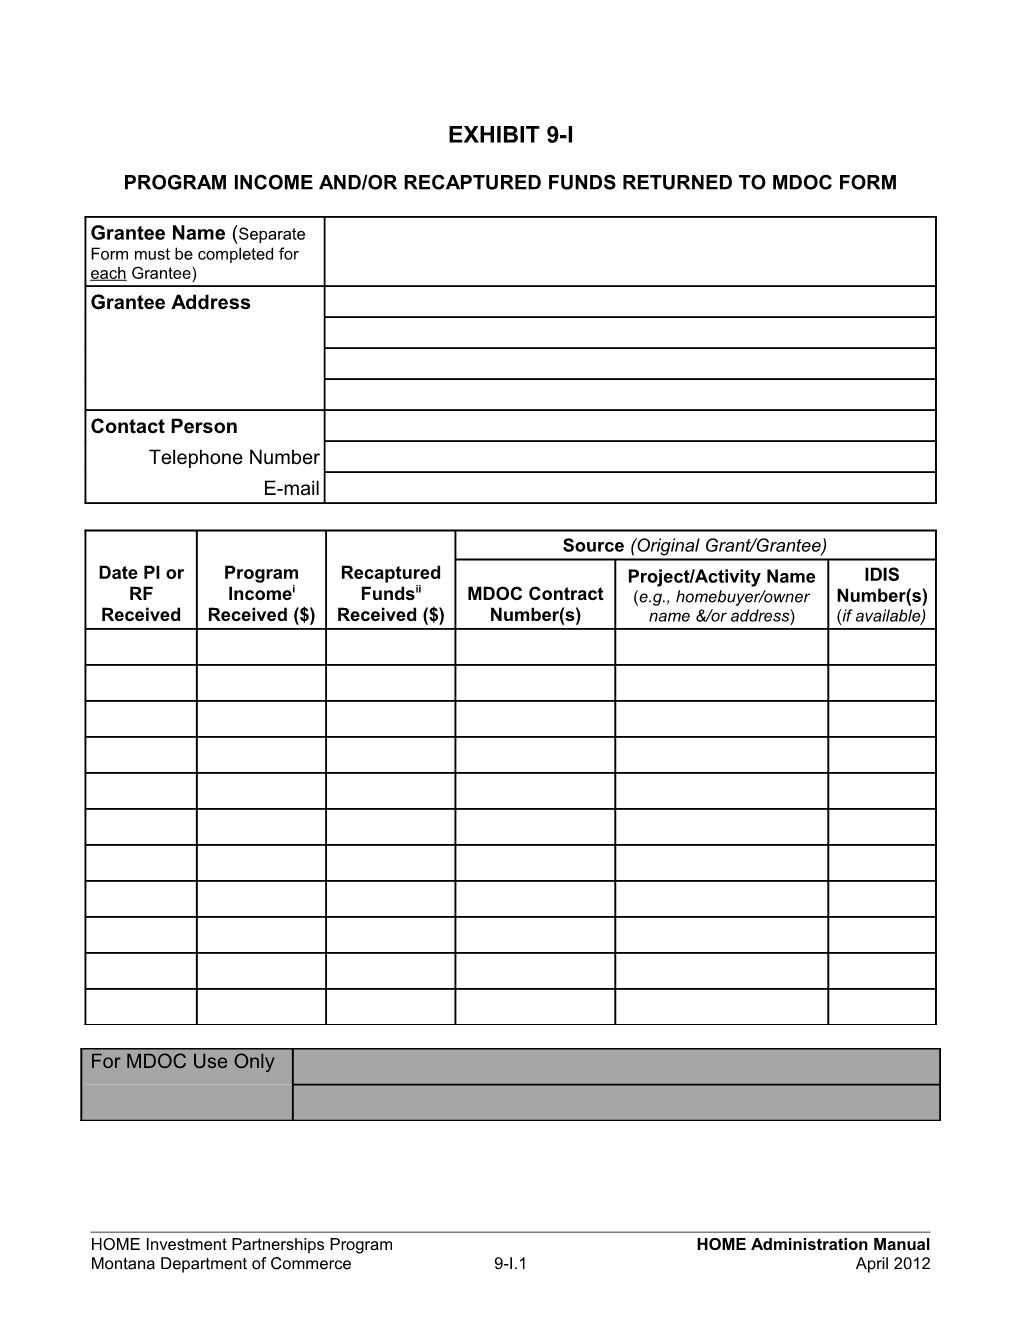 Program Income And/Or Recaptured Funds Returned to Mdoc Form